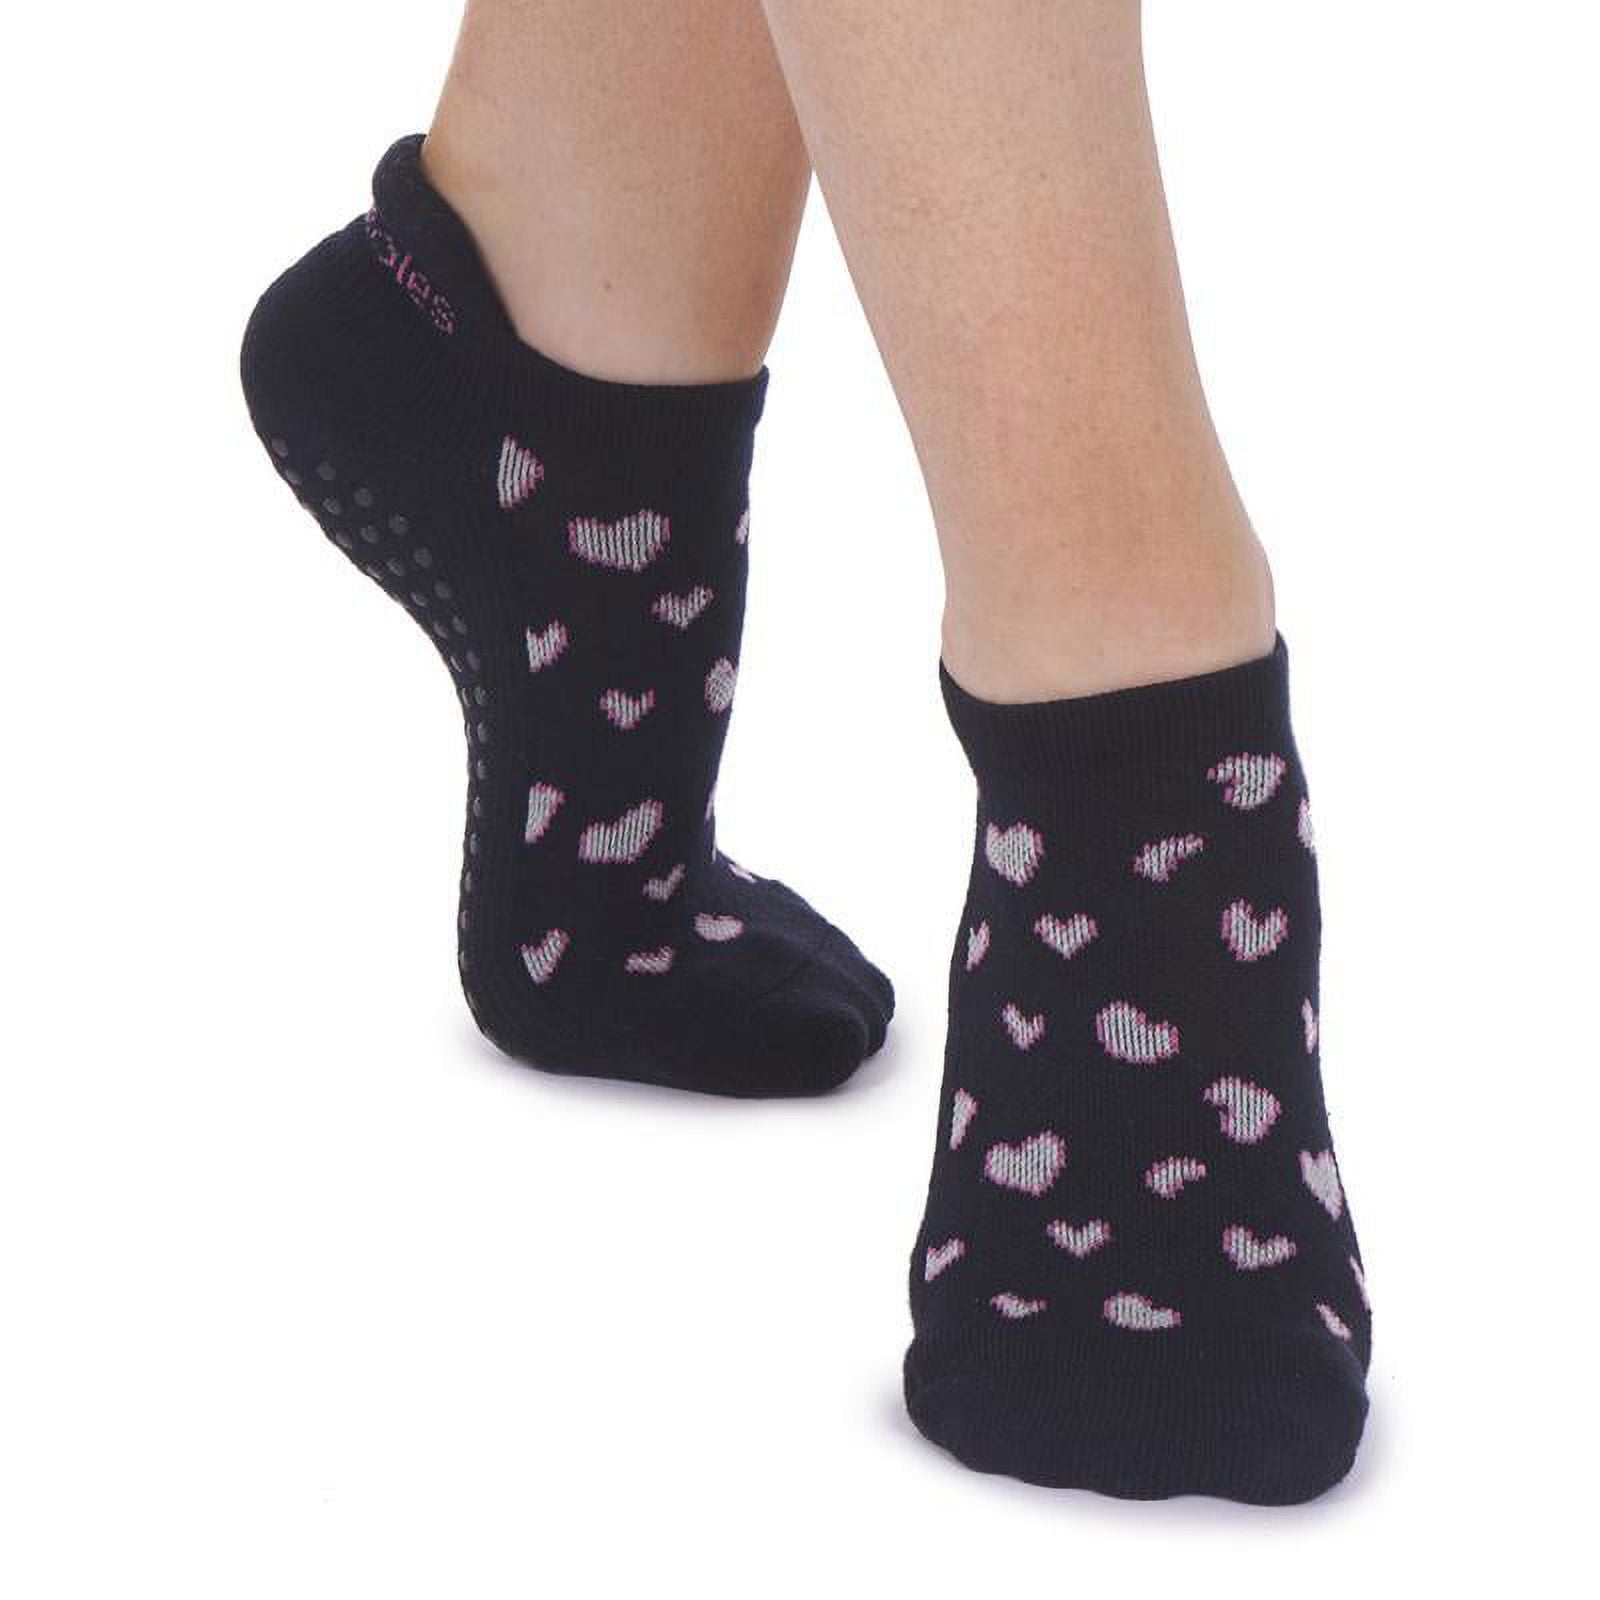 Lucy Tab Back Non Slip Grip Socks for Pilates, Barre, Yoga, Dance, Workout  in Black/White Polka Dots 